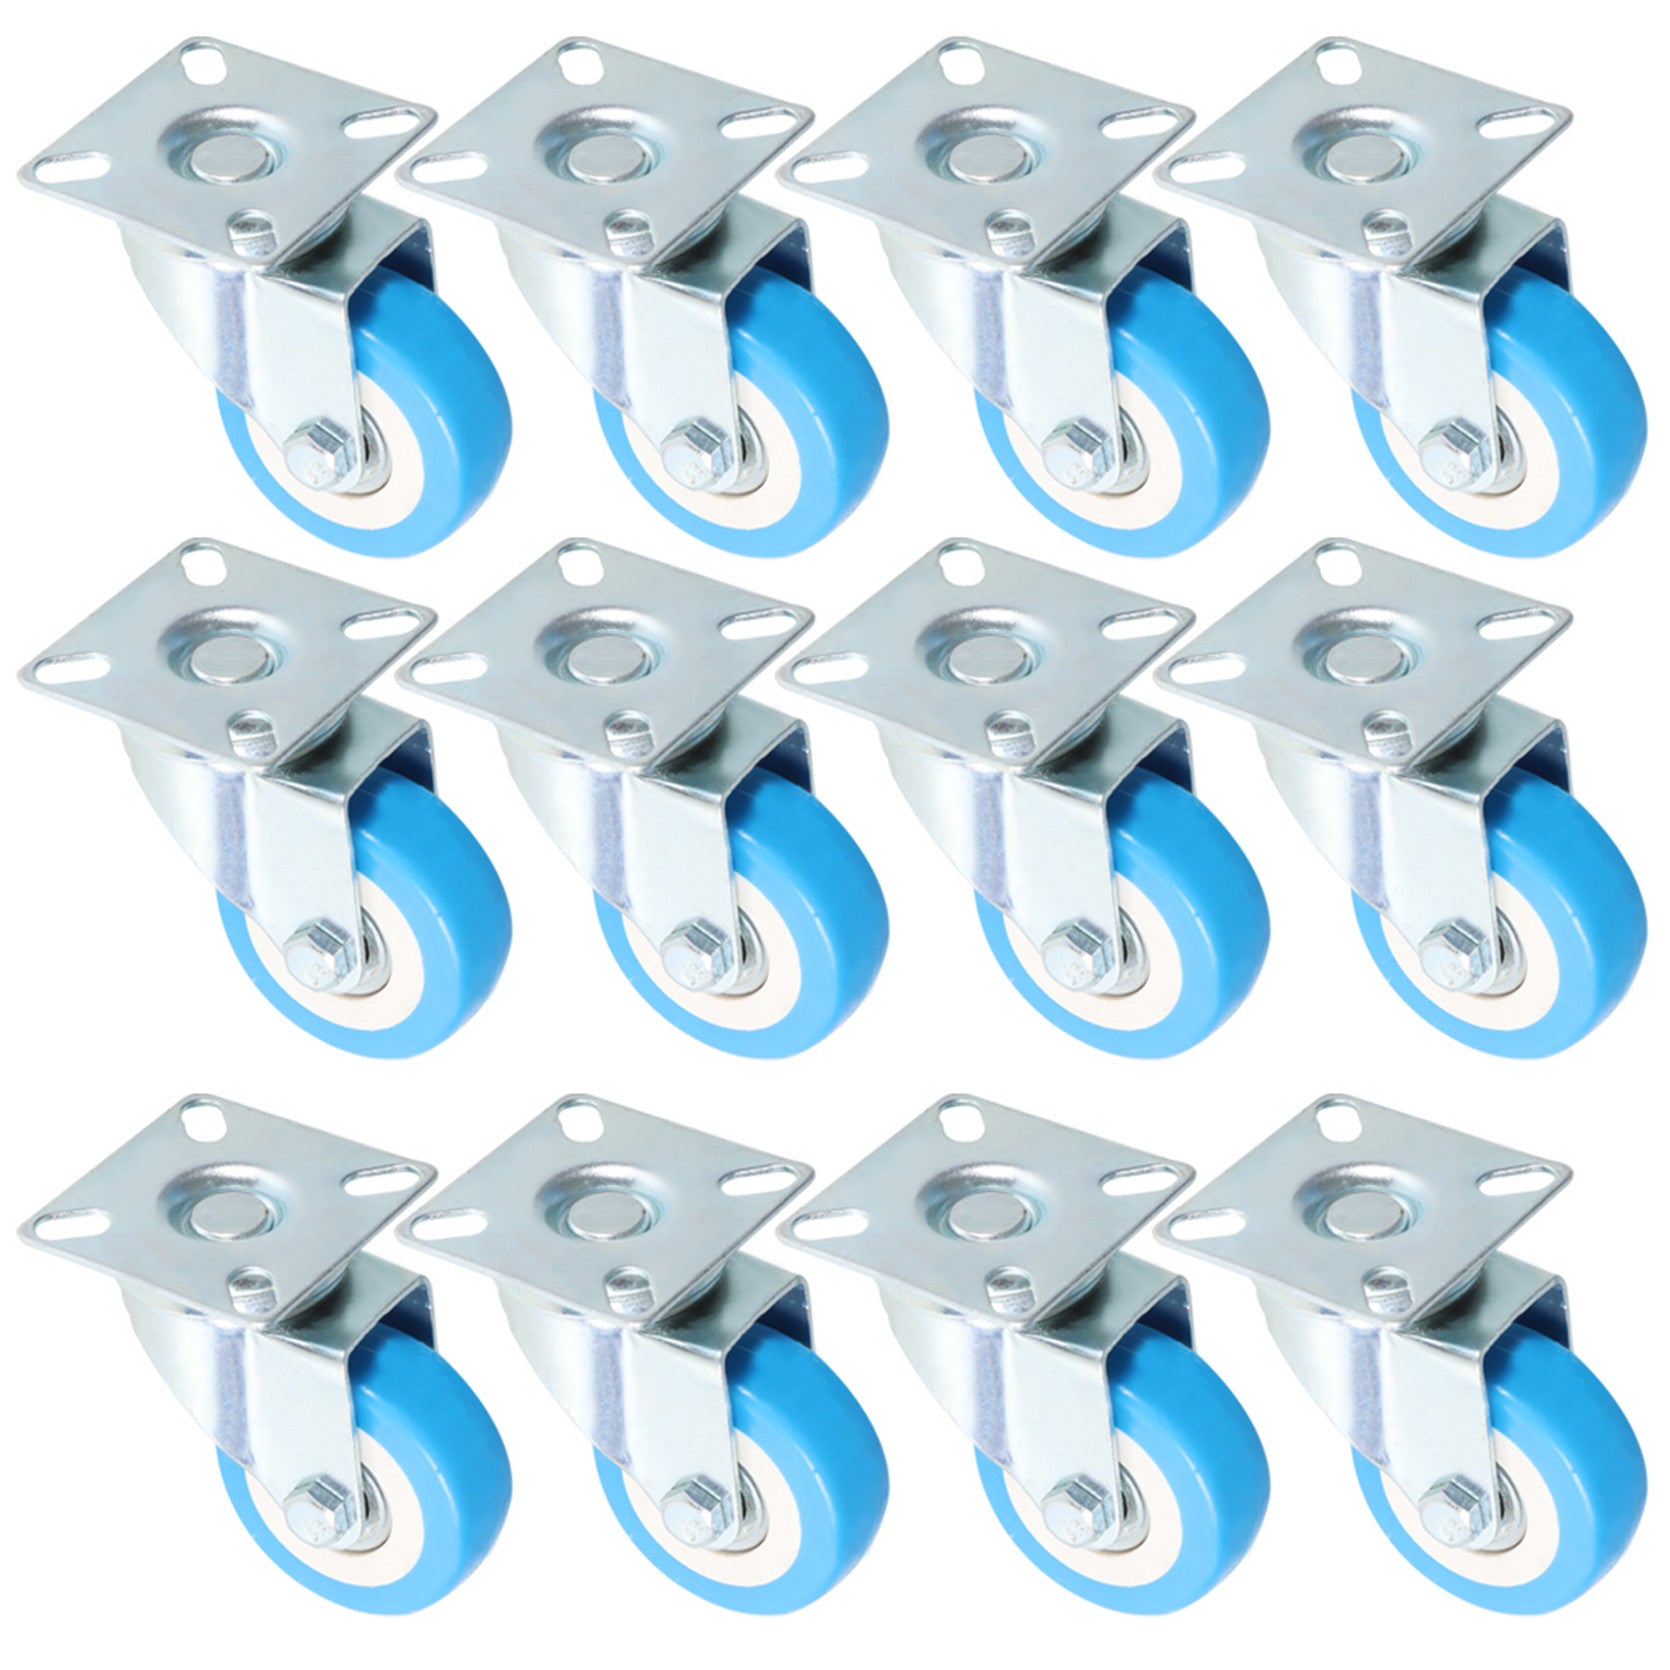 findmall Heavy Duty Swivel Caster Polyurethane Wheels 12 Pack 2 Inch Base Top Plate Double Ball Bearing FINDMALLPARTS